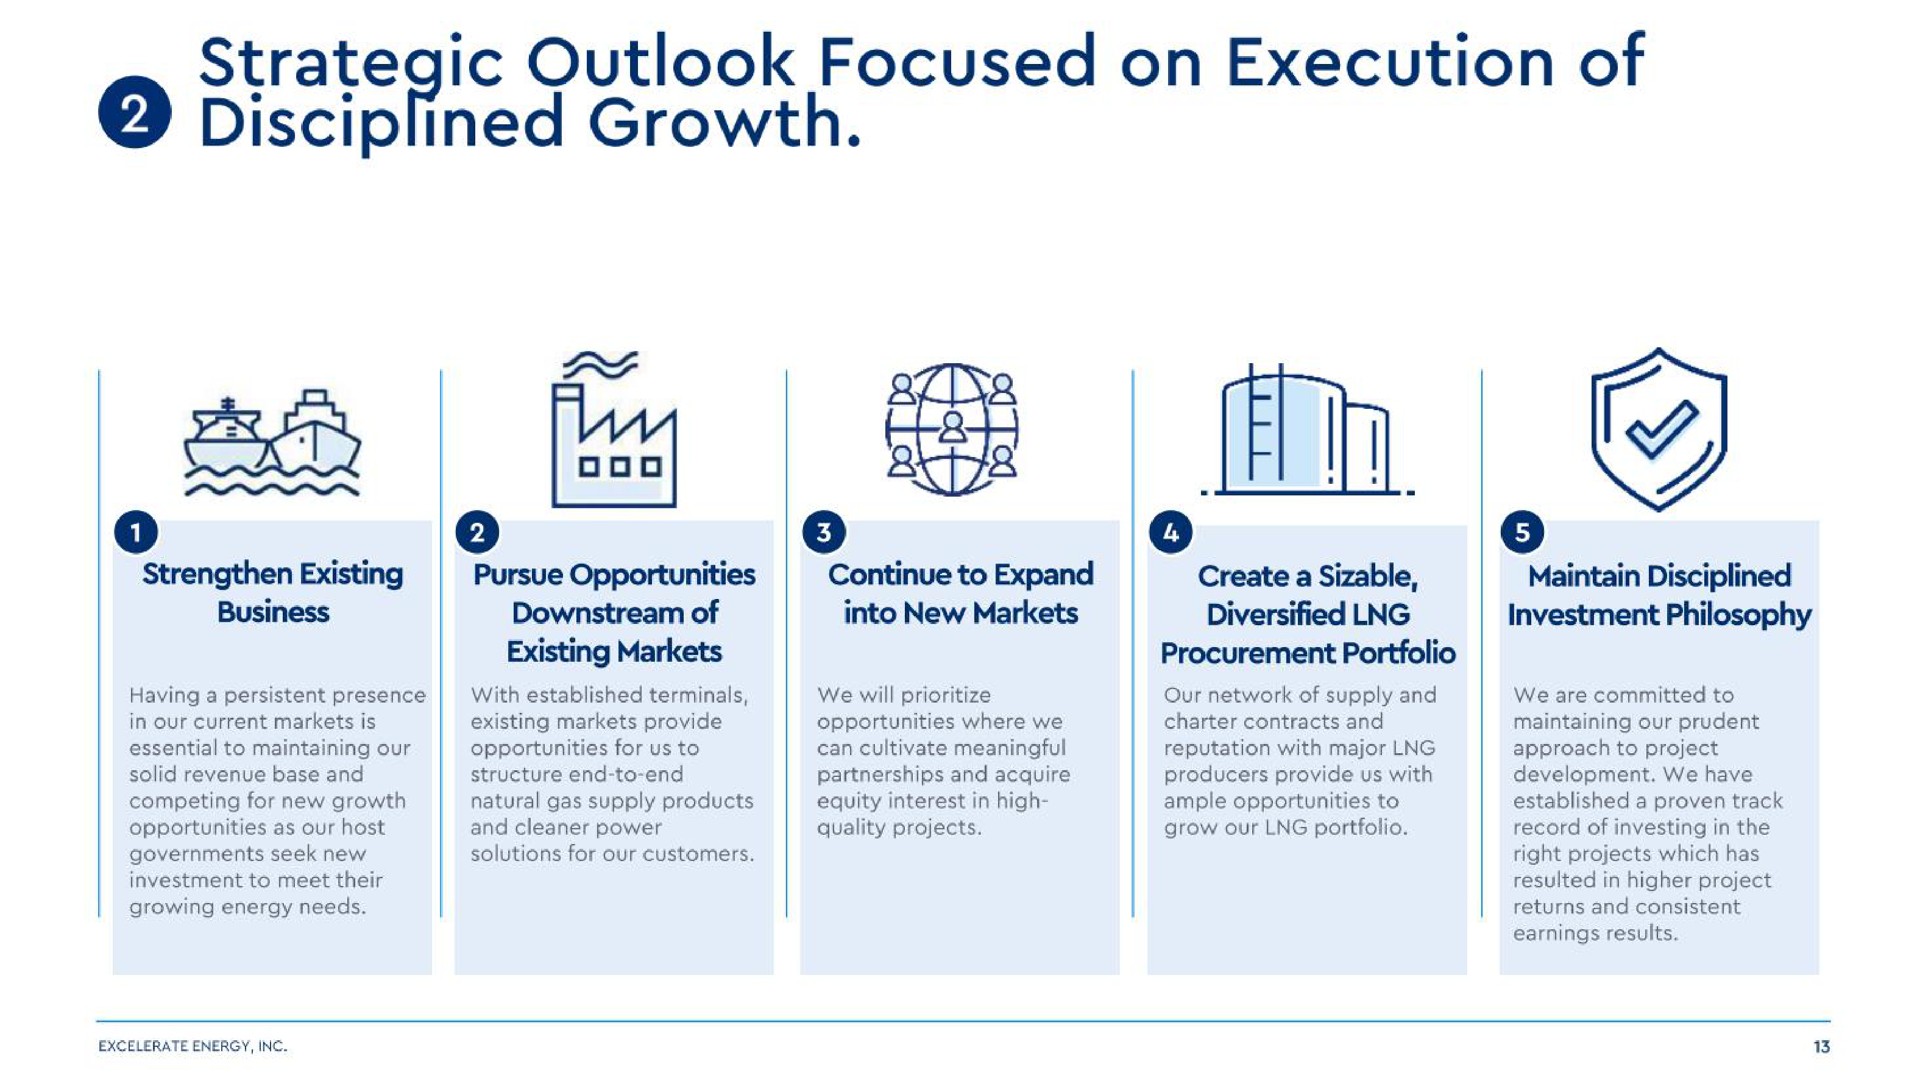 outlook focused on execution of growth | Excelerate Energy